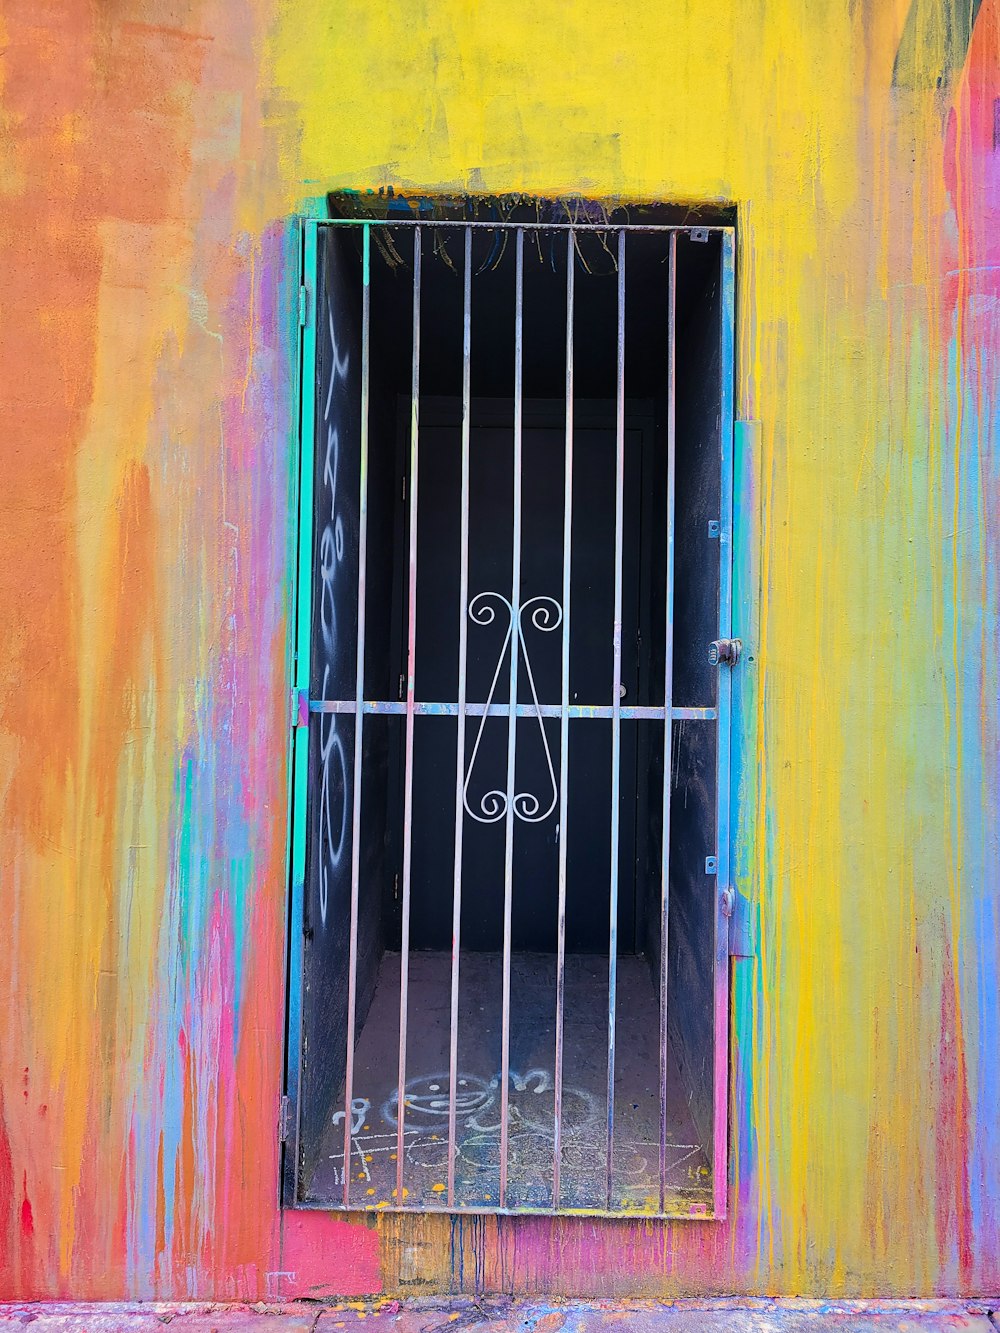 a barred window on a colorful wall with bars